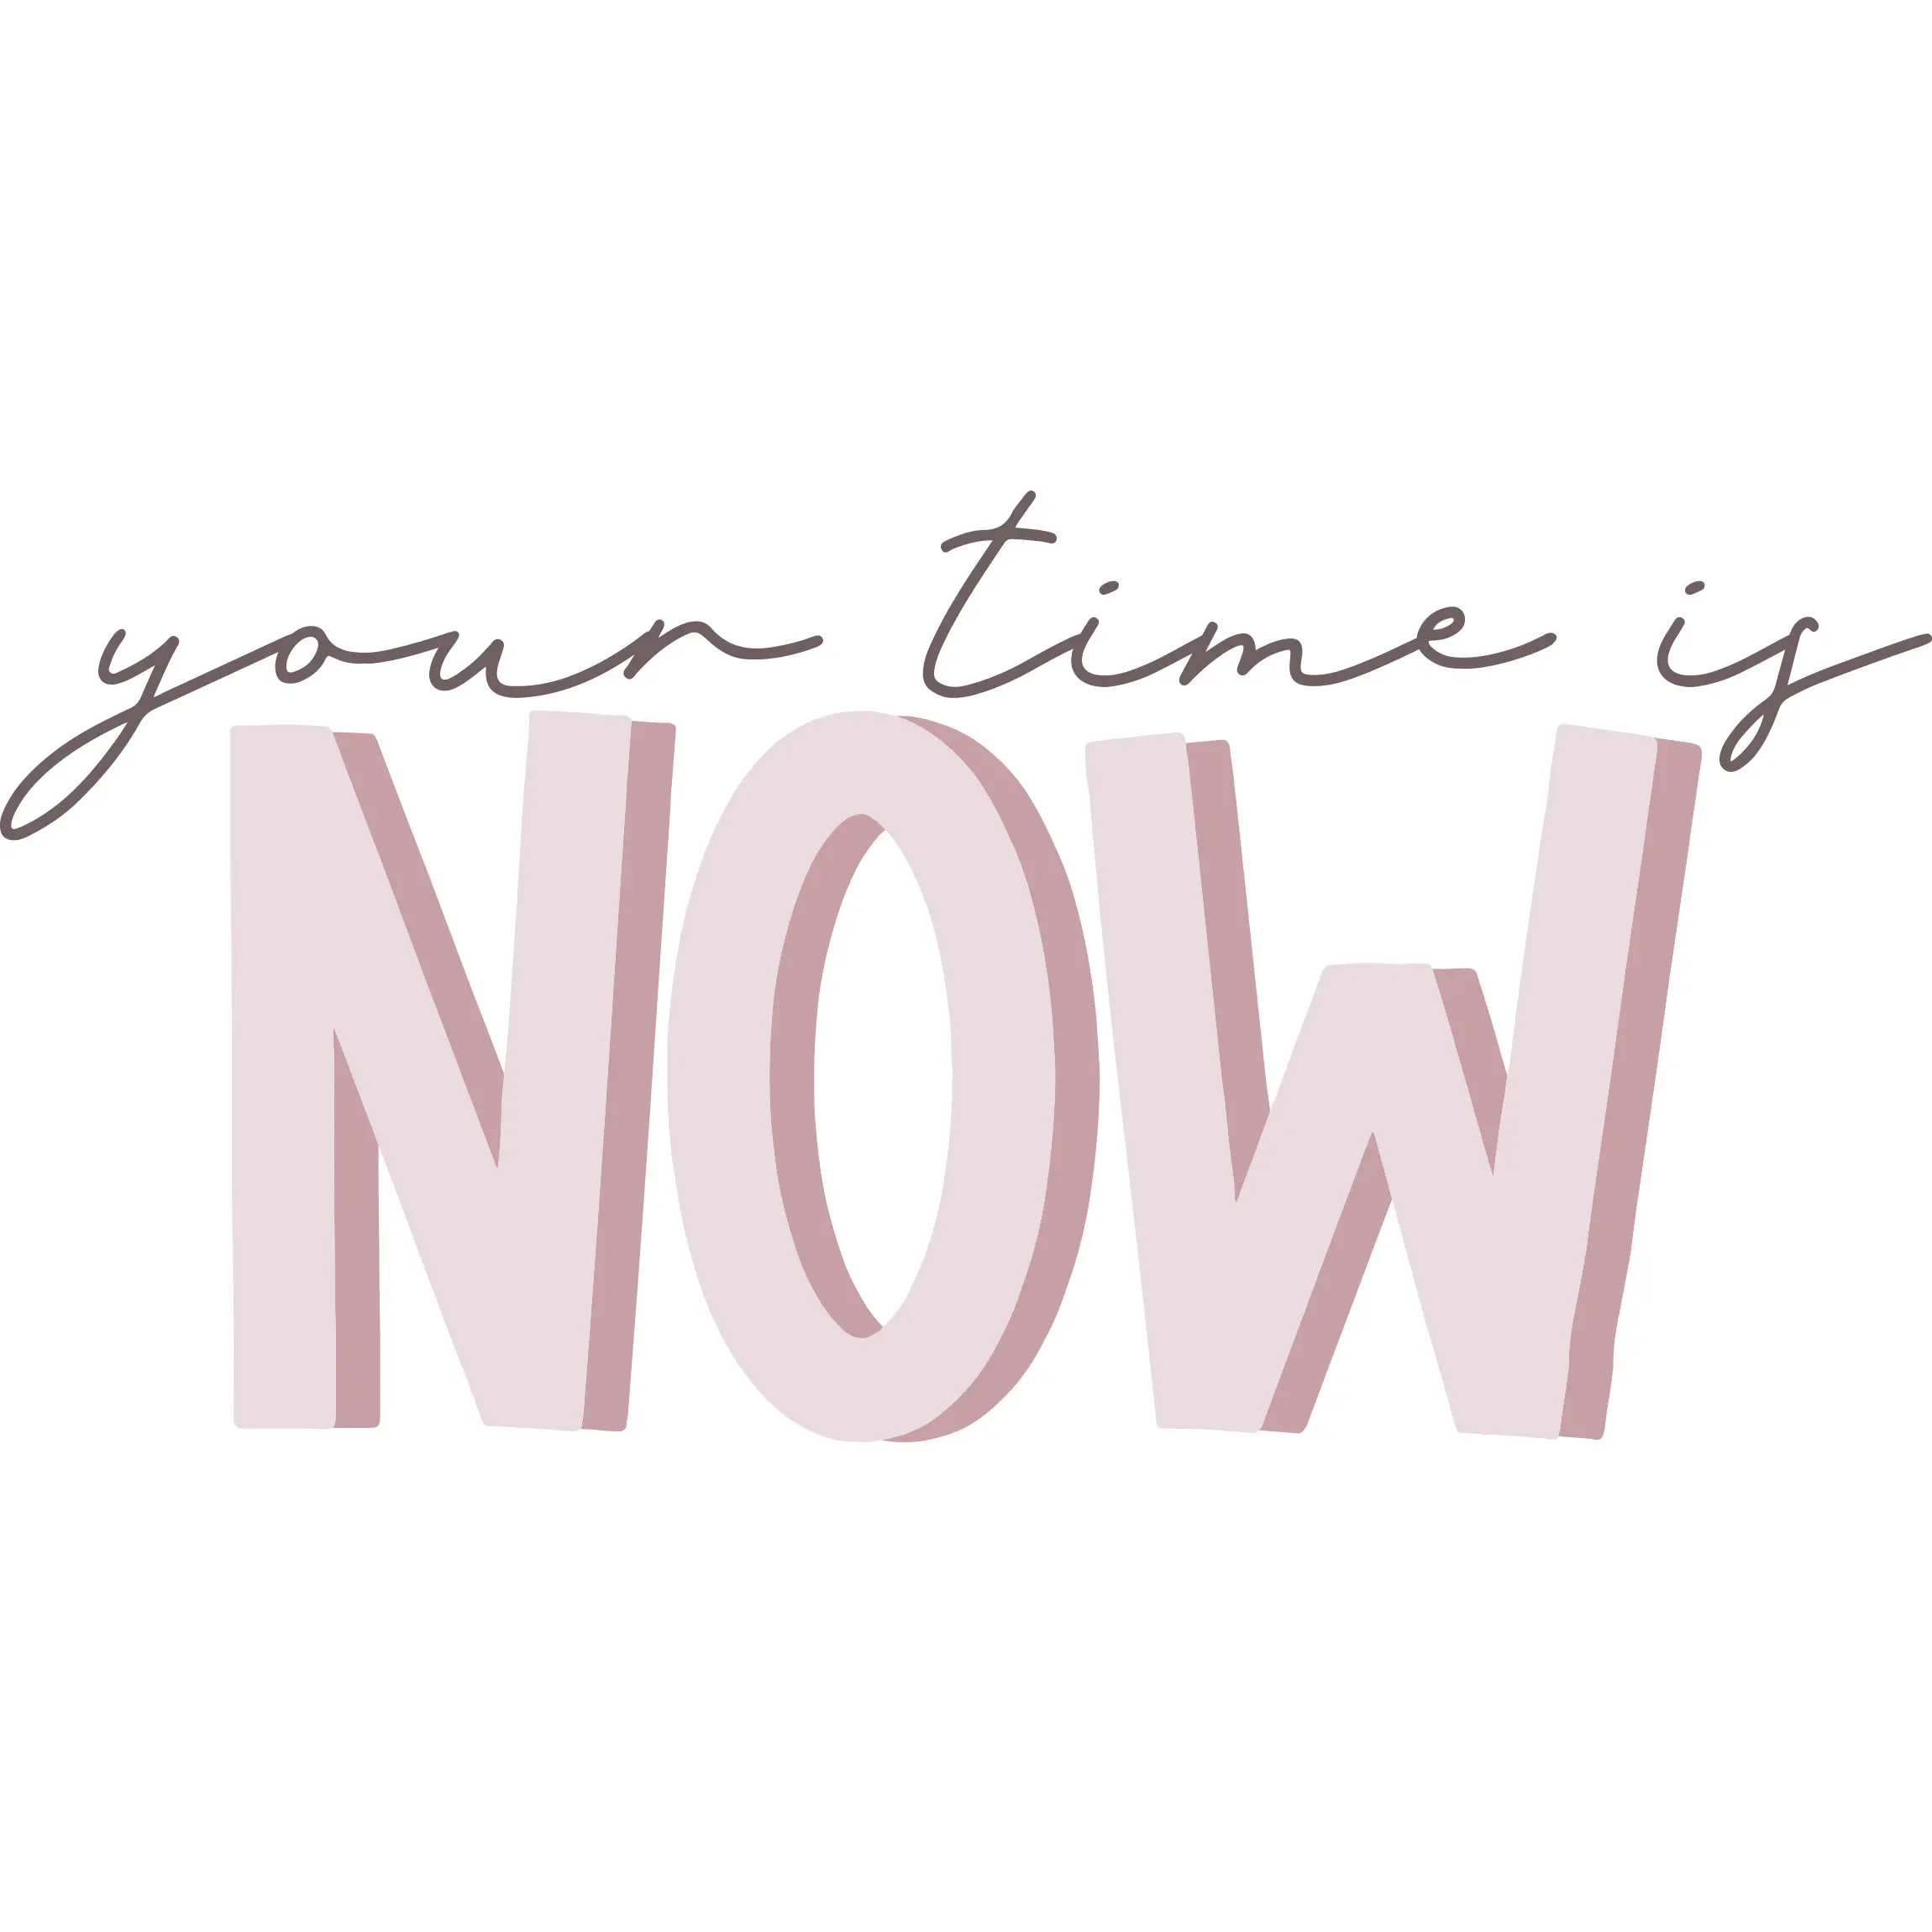 time is Your now